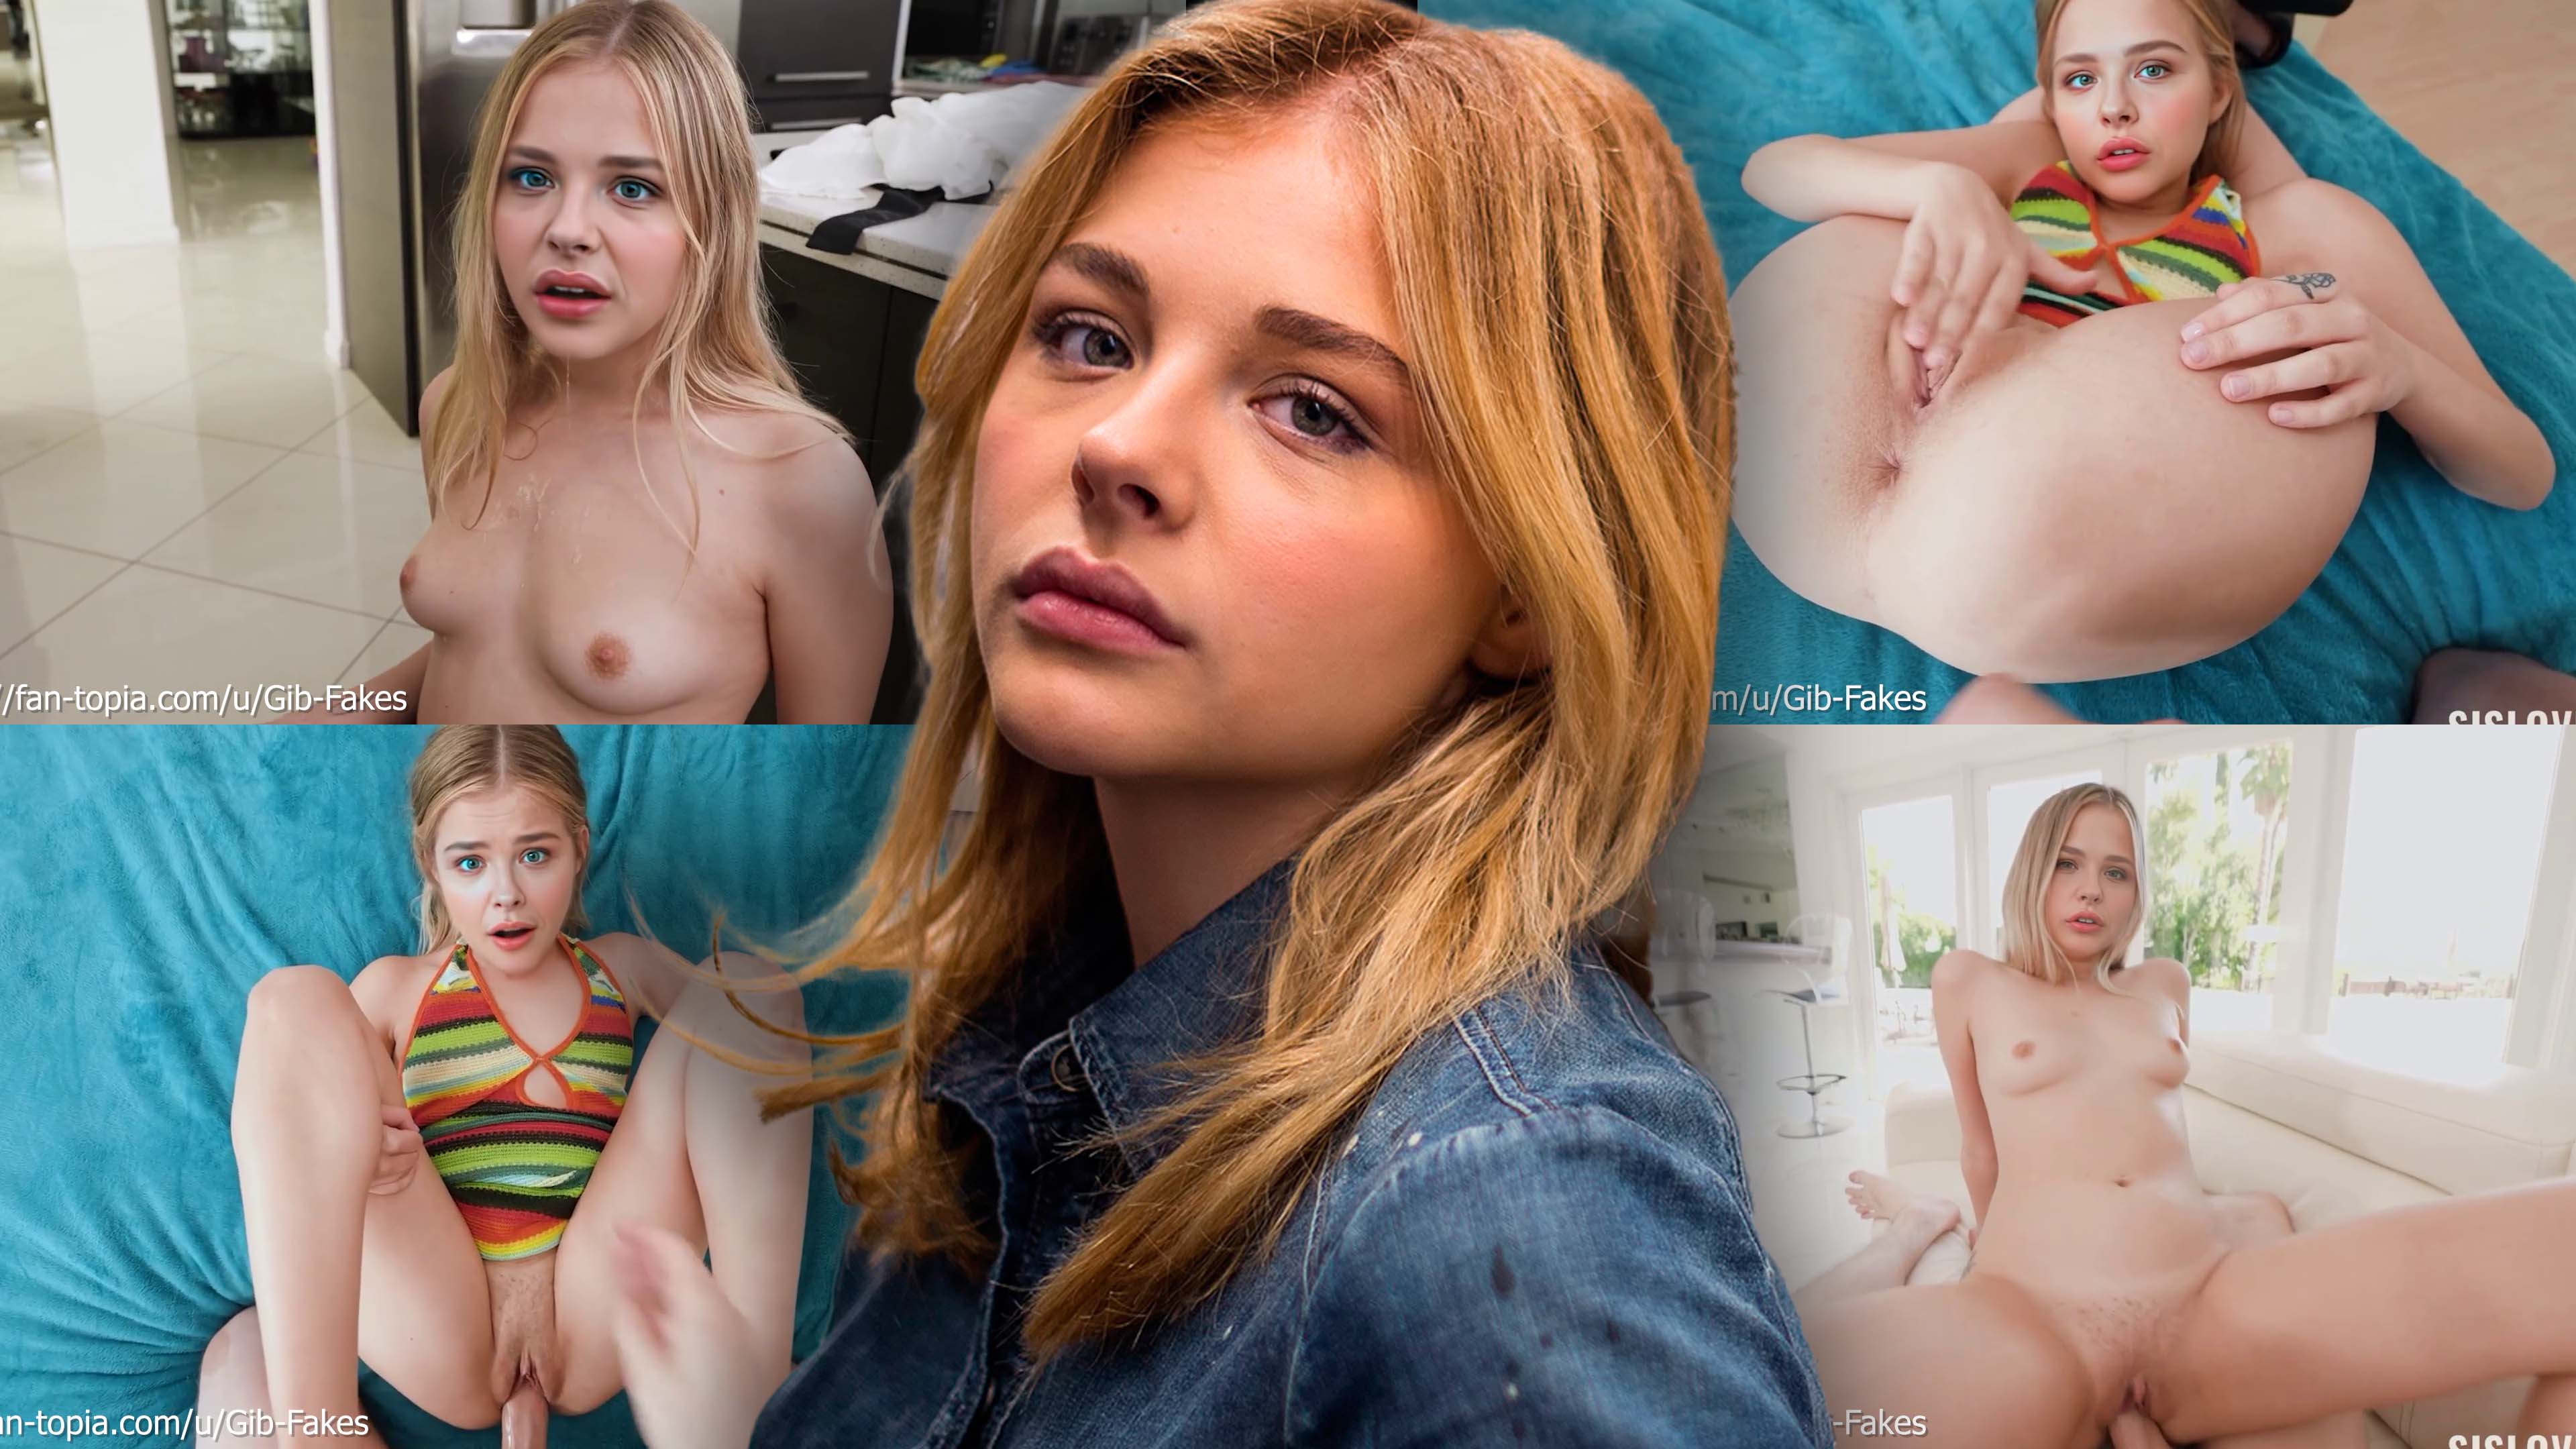 Chloe Grace Moretz Really Wants Her Brother to Fail No Nut November (FULL VIDEO)